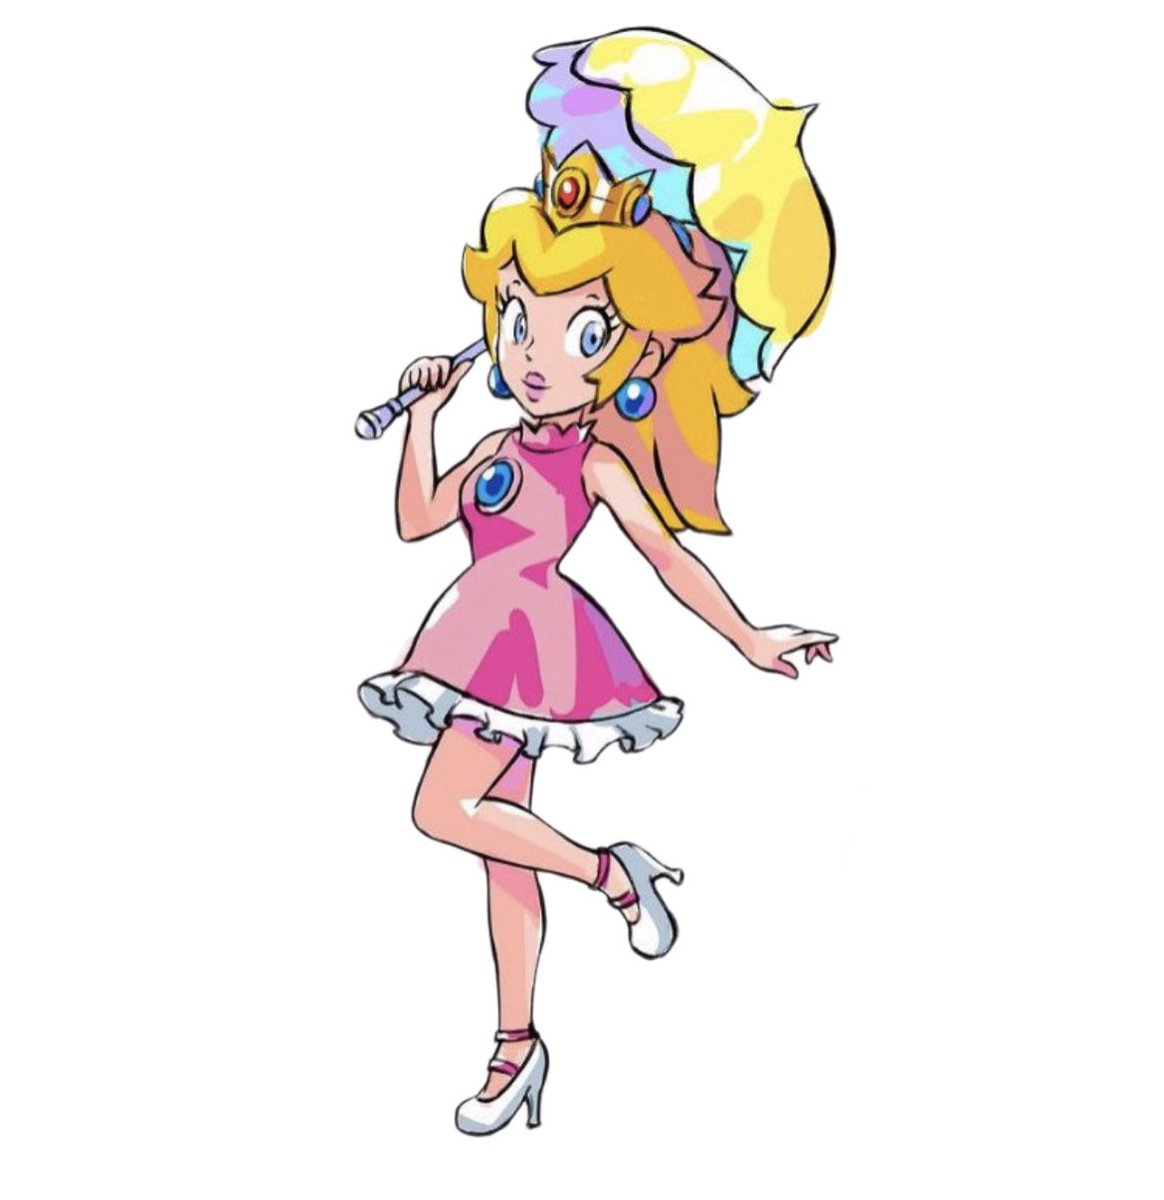 this artwork of peach in this outfit drawn by masanori sato is sooo cute